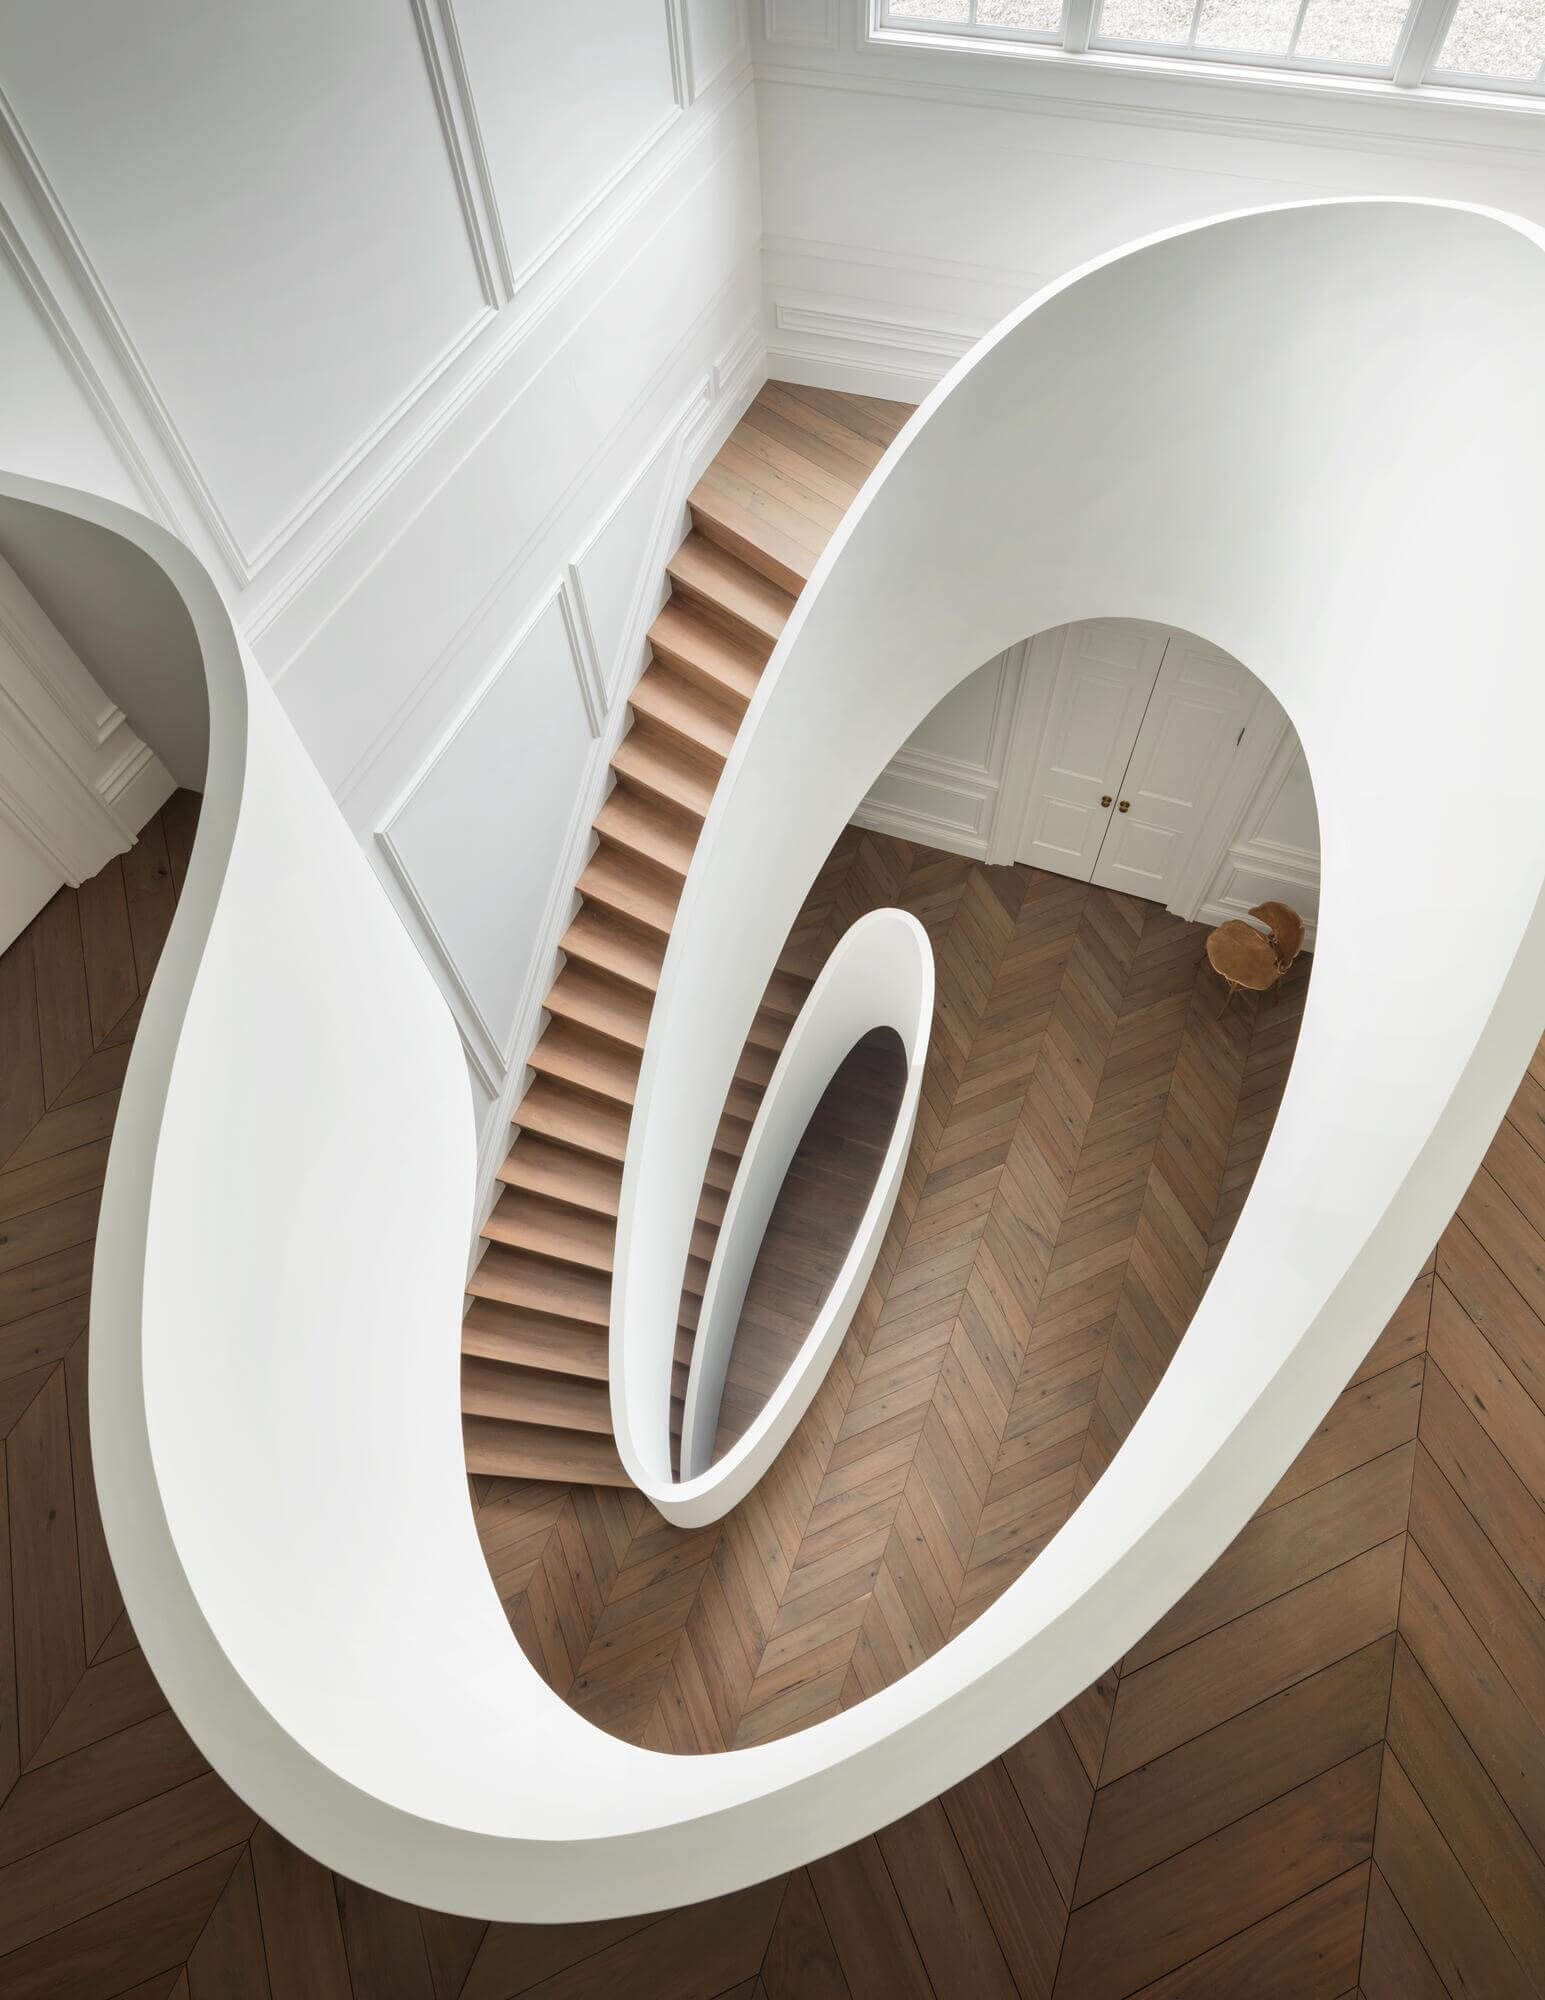 Steven Harris Architects' Masterpiece Staircase